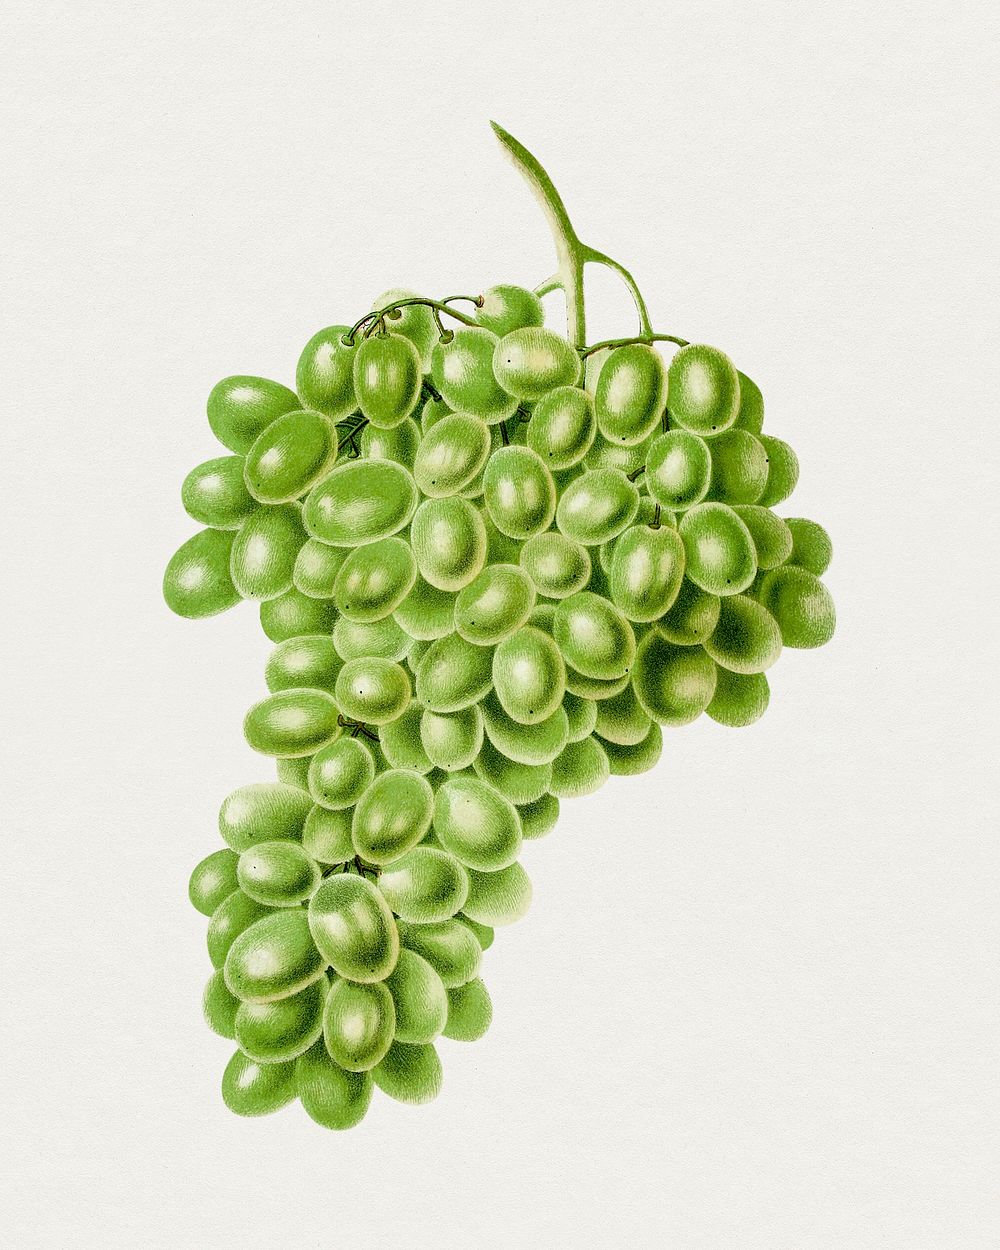 Hand drawn white grapes. Original from Biodiversity Heritage Library. Digitally enhanced by rawpixel.